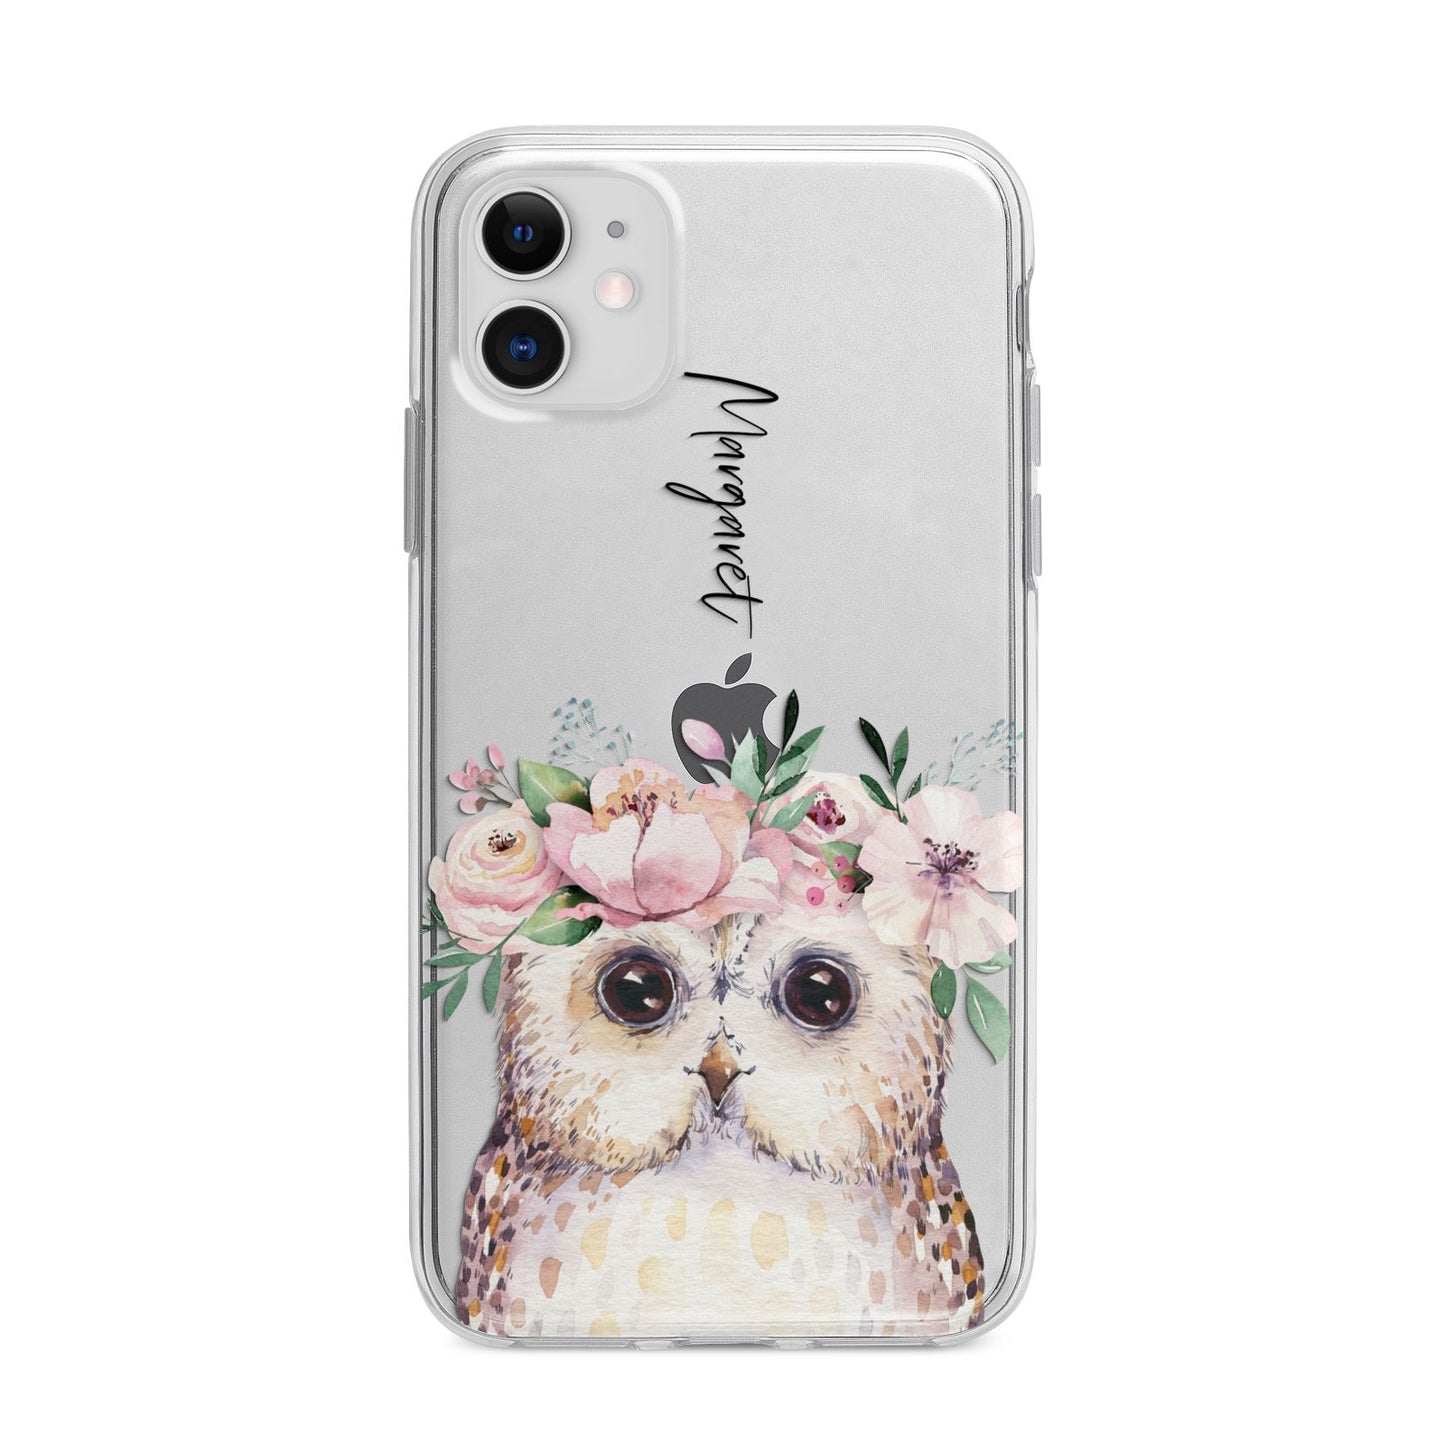 Personalised Name Owl Apple iPhone 11 in White with Bumper Case